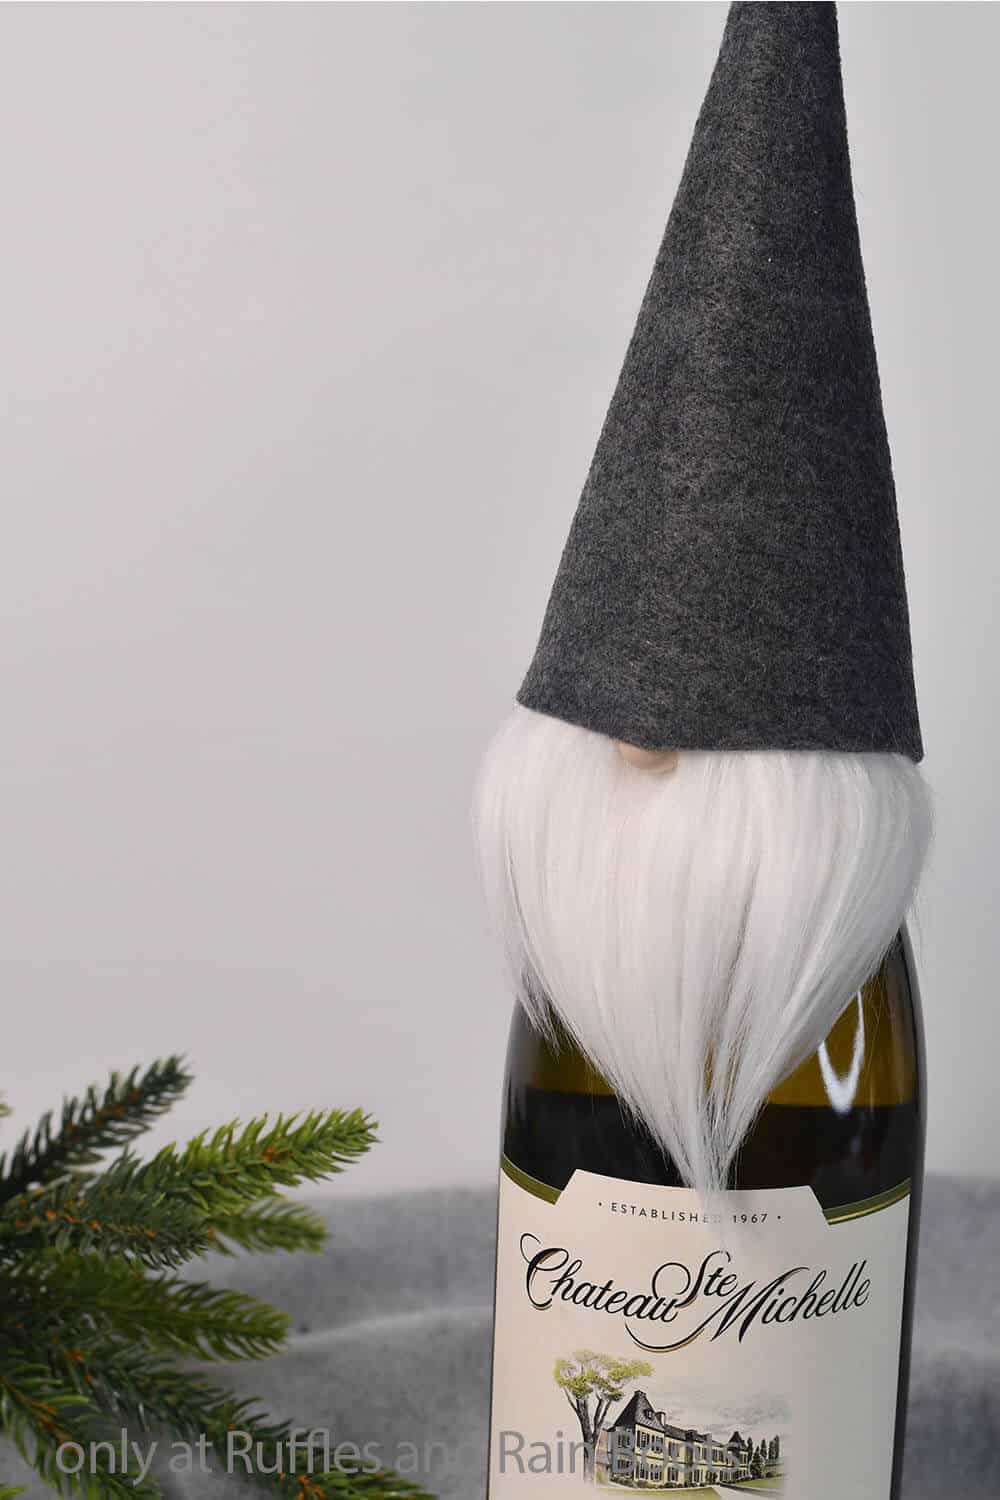 A vertical image showing a felt gnome wine bottle topper on a wine bottle next to a pine spring on a gray fleece desk and a white background.